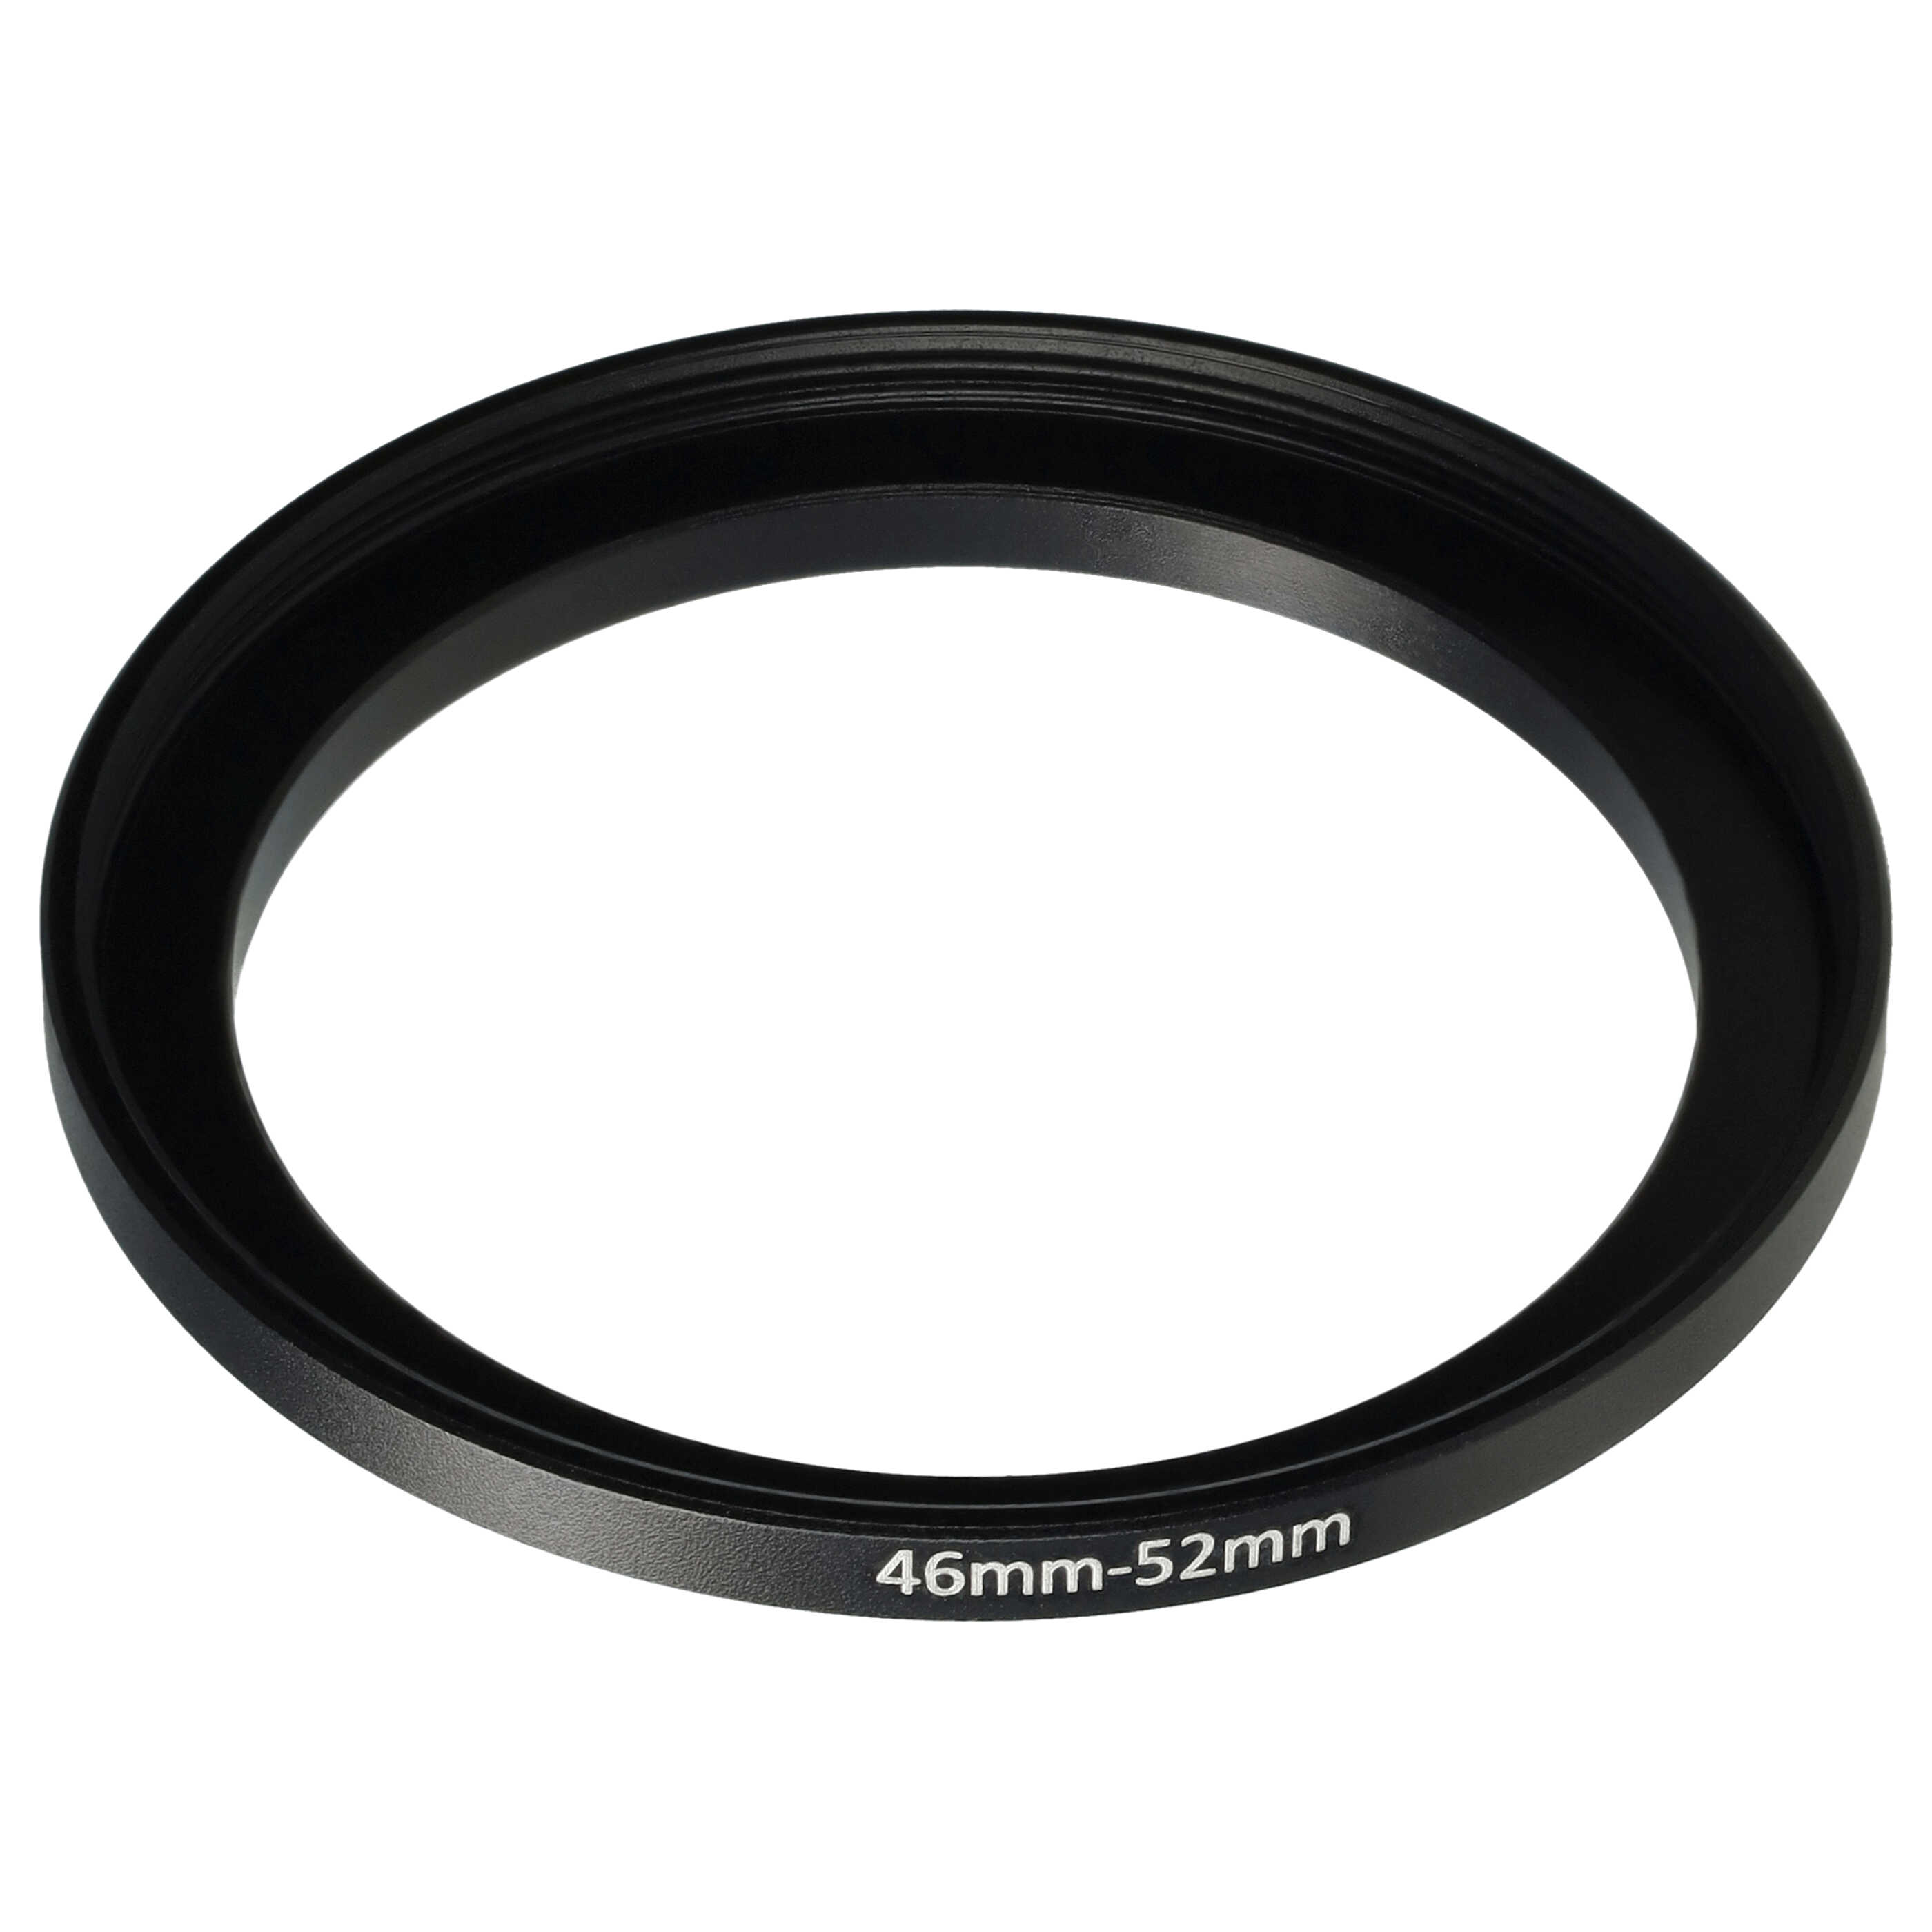 Step-Up Ring Adapter of 46 mm to 52 mmfor various Camera Lens - Filter Adapter